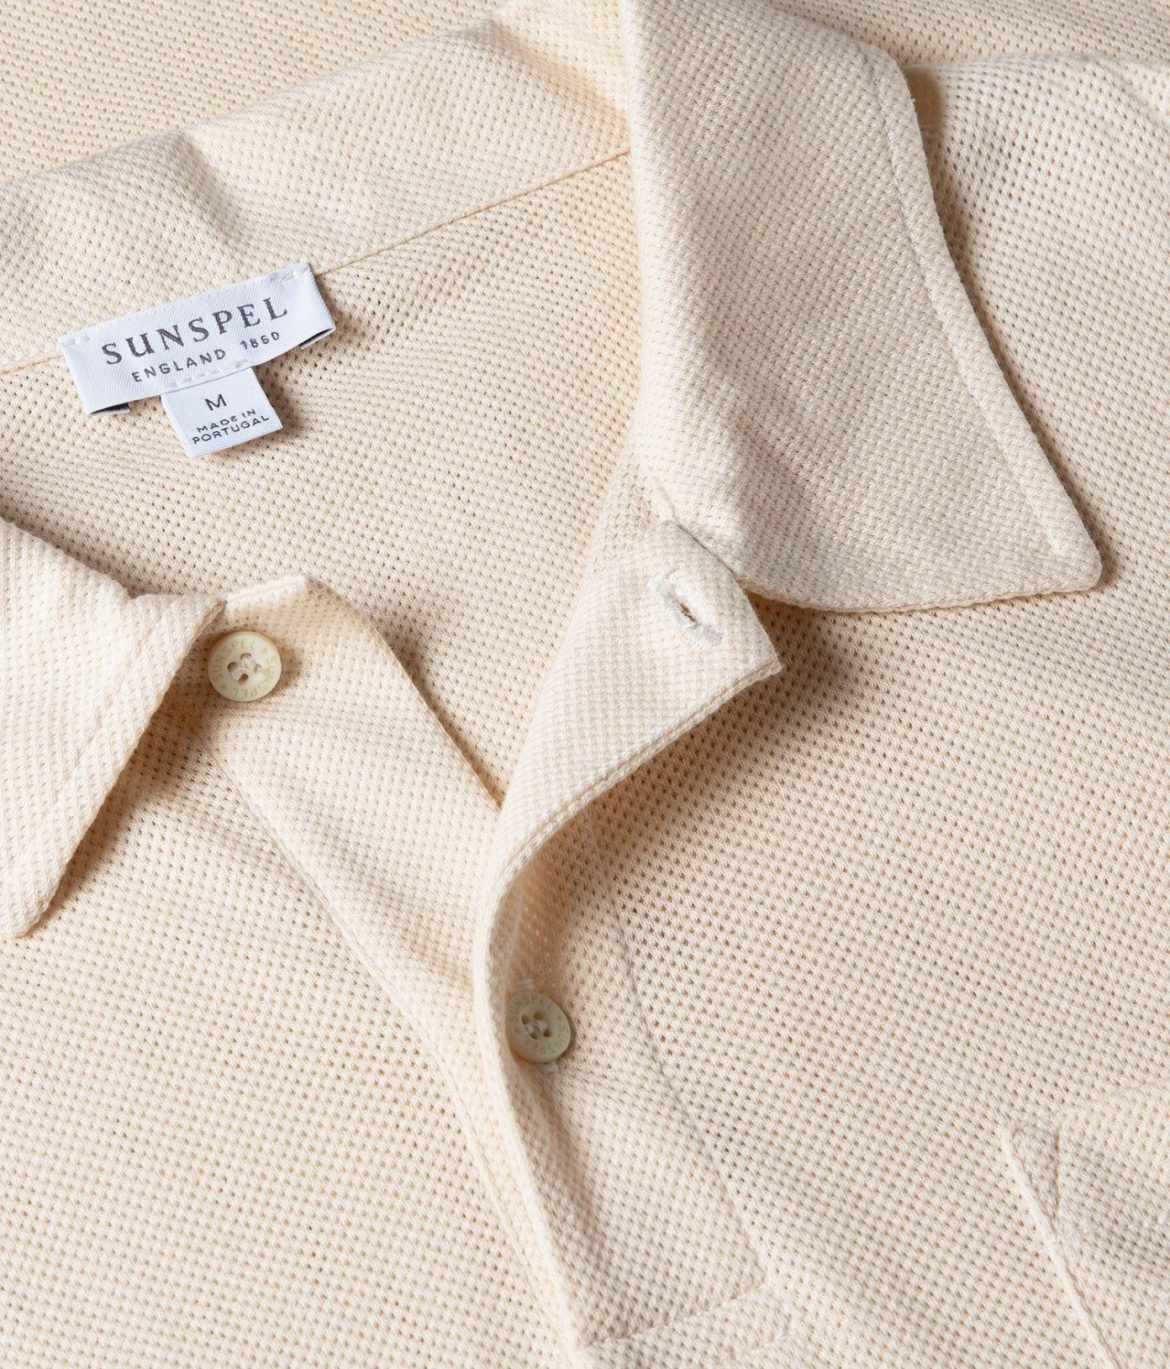 SUNSPEL Riviera Polo Shirt Undyed - The Refinement